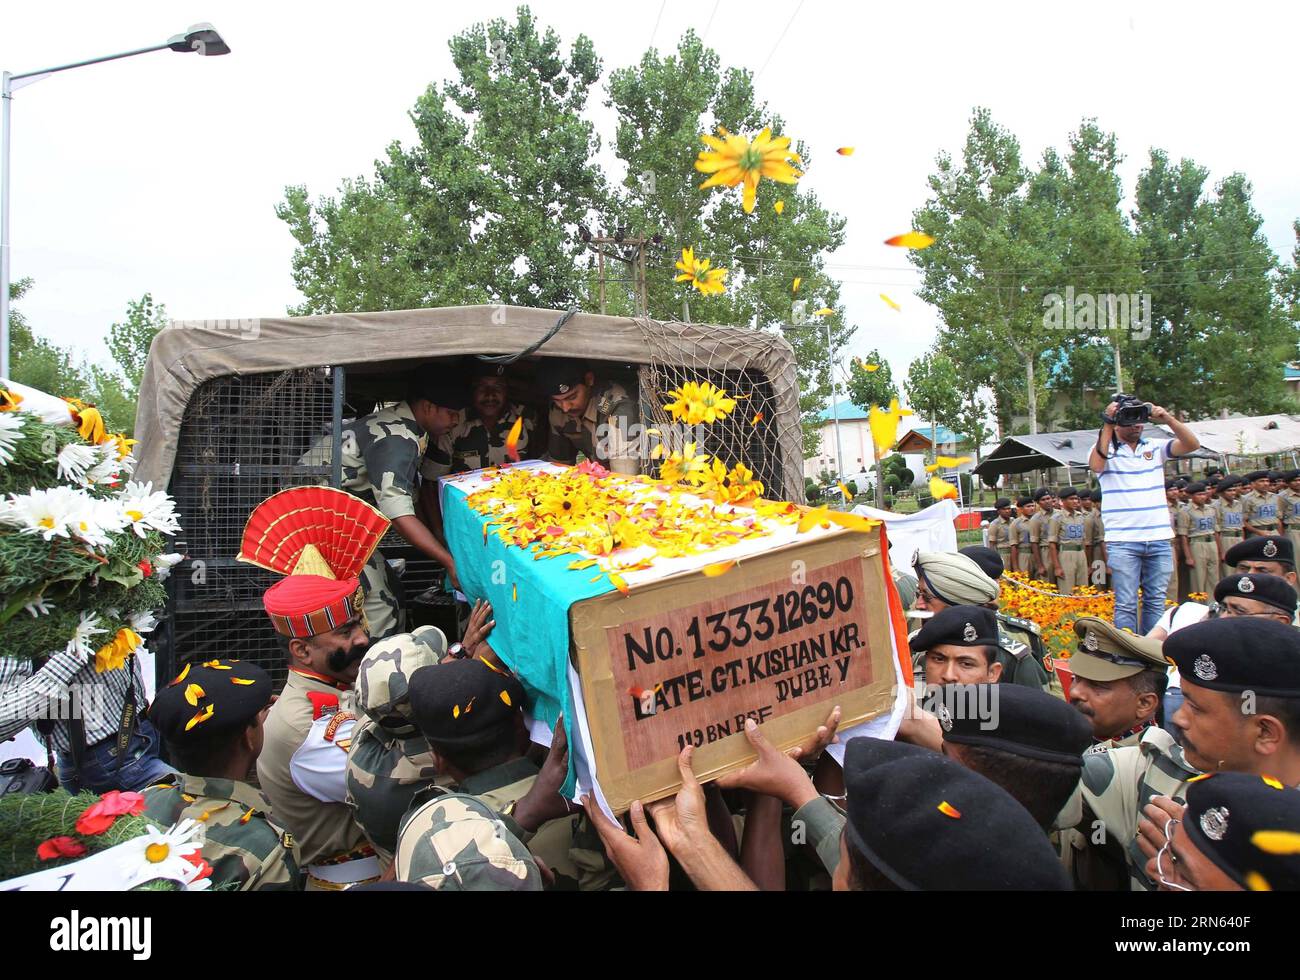 (150710) -- SRINAGAR, July 10, 2015 -- Border guards of India s Border Security Force (BSF) carry the coffin of their colleague at their base camp in Humhama, on the outskirts of Srinagar, summer capital of Indian-controlled Kashmir, on July 10, 2015. A border guard of India s BSF has been killed in firing from Pakistan side on Line of Control (LoC) dividing Kashmir. ) KASHMIR-SRINAGAR-BORDER GUARD-WREATH LAYING JavedxDar PUBLICATIONxNOTxINxCHN   150710 Srinagar July 10 2015 Border Guards of India S Border Security Force BSF Carry The Coffin of their colleague AT their Base Camp in Humhama ON Stock Photo